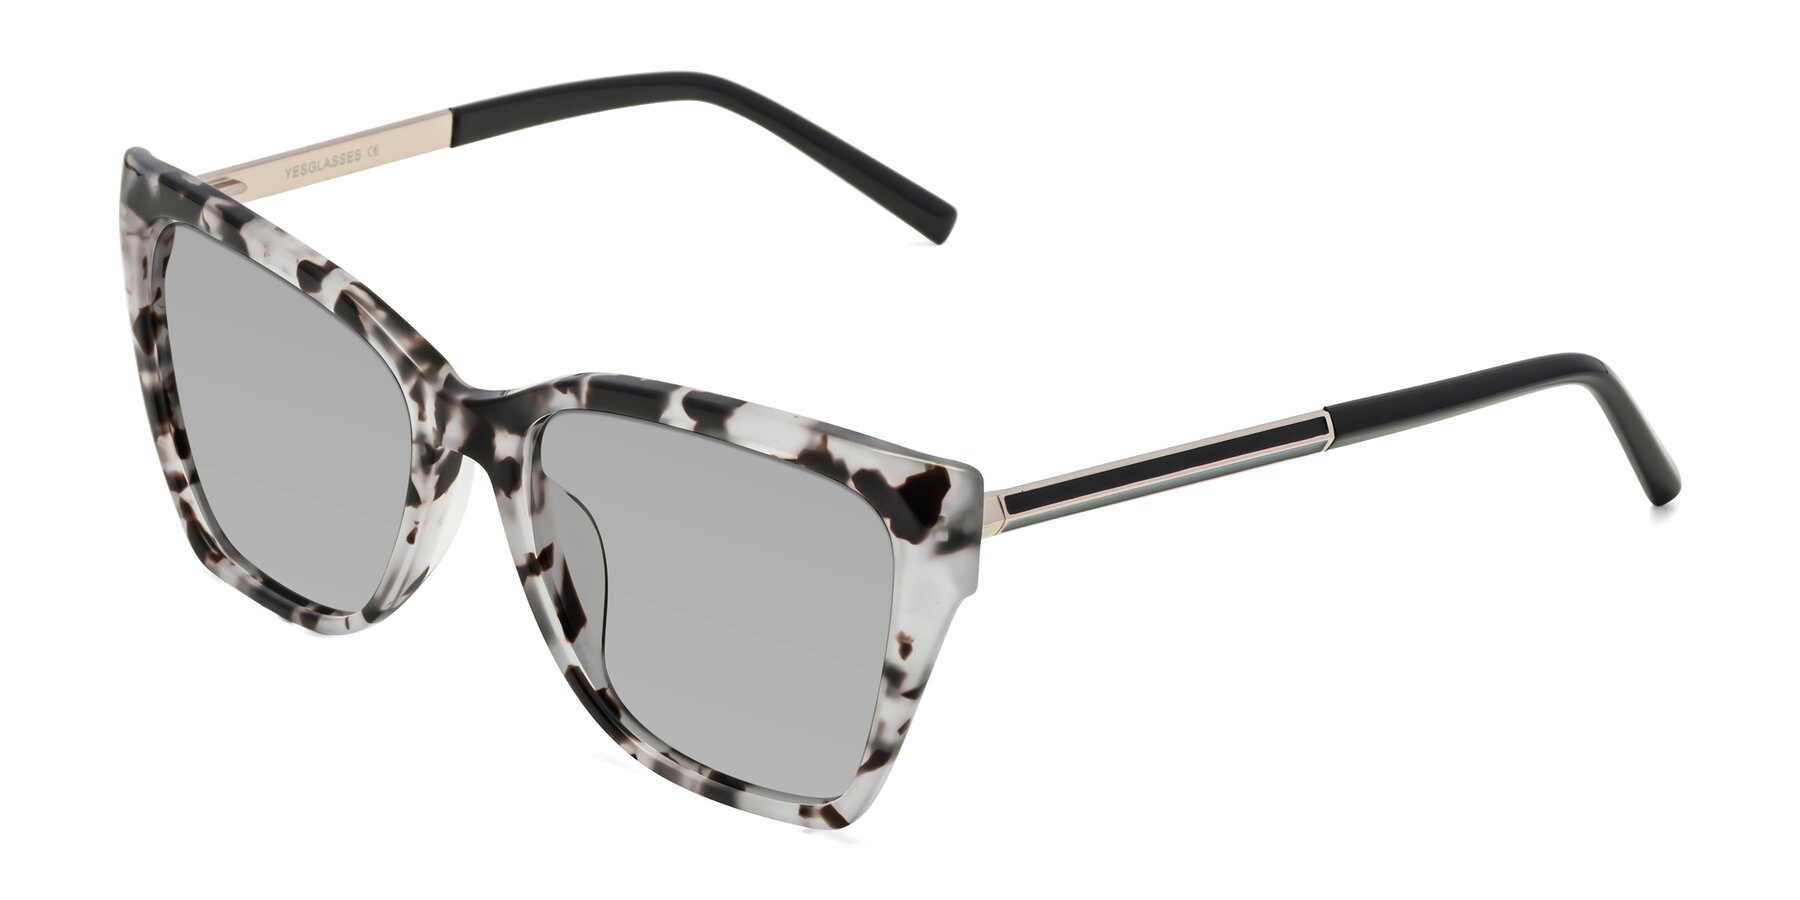 Angle of Swartz in White Tortoise with Light Gray Tinted Lenses